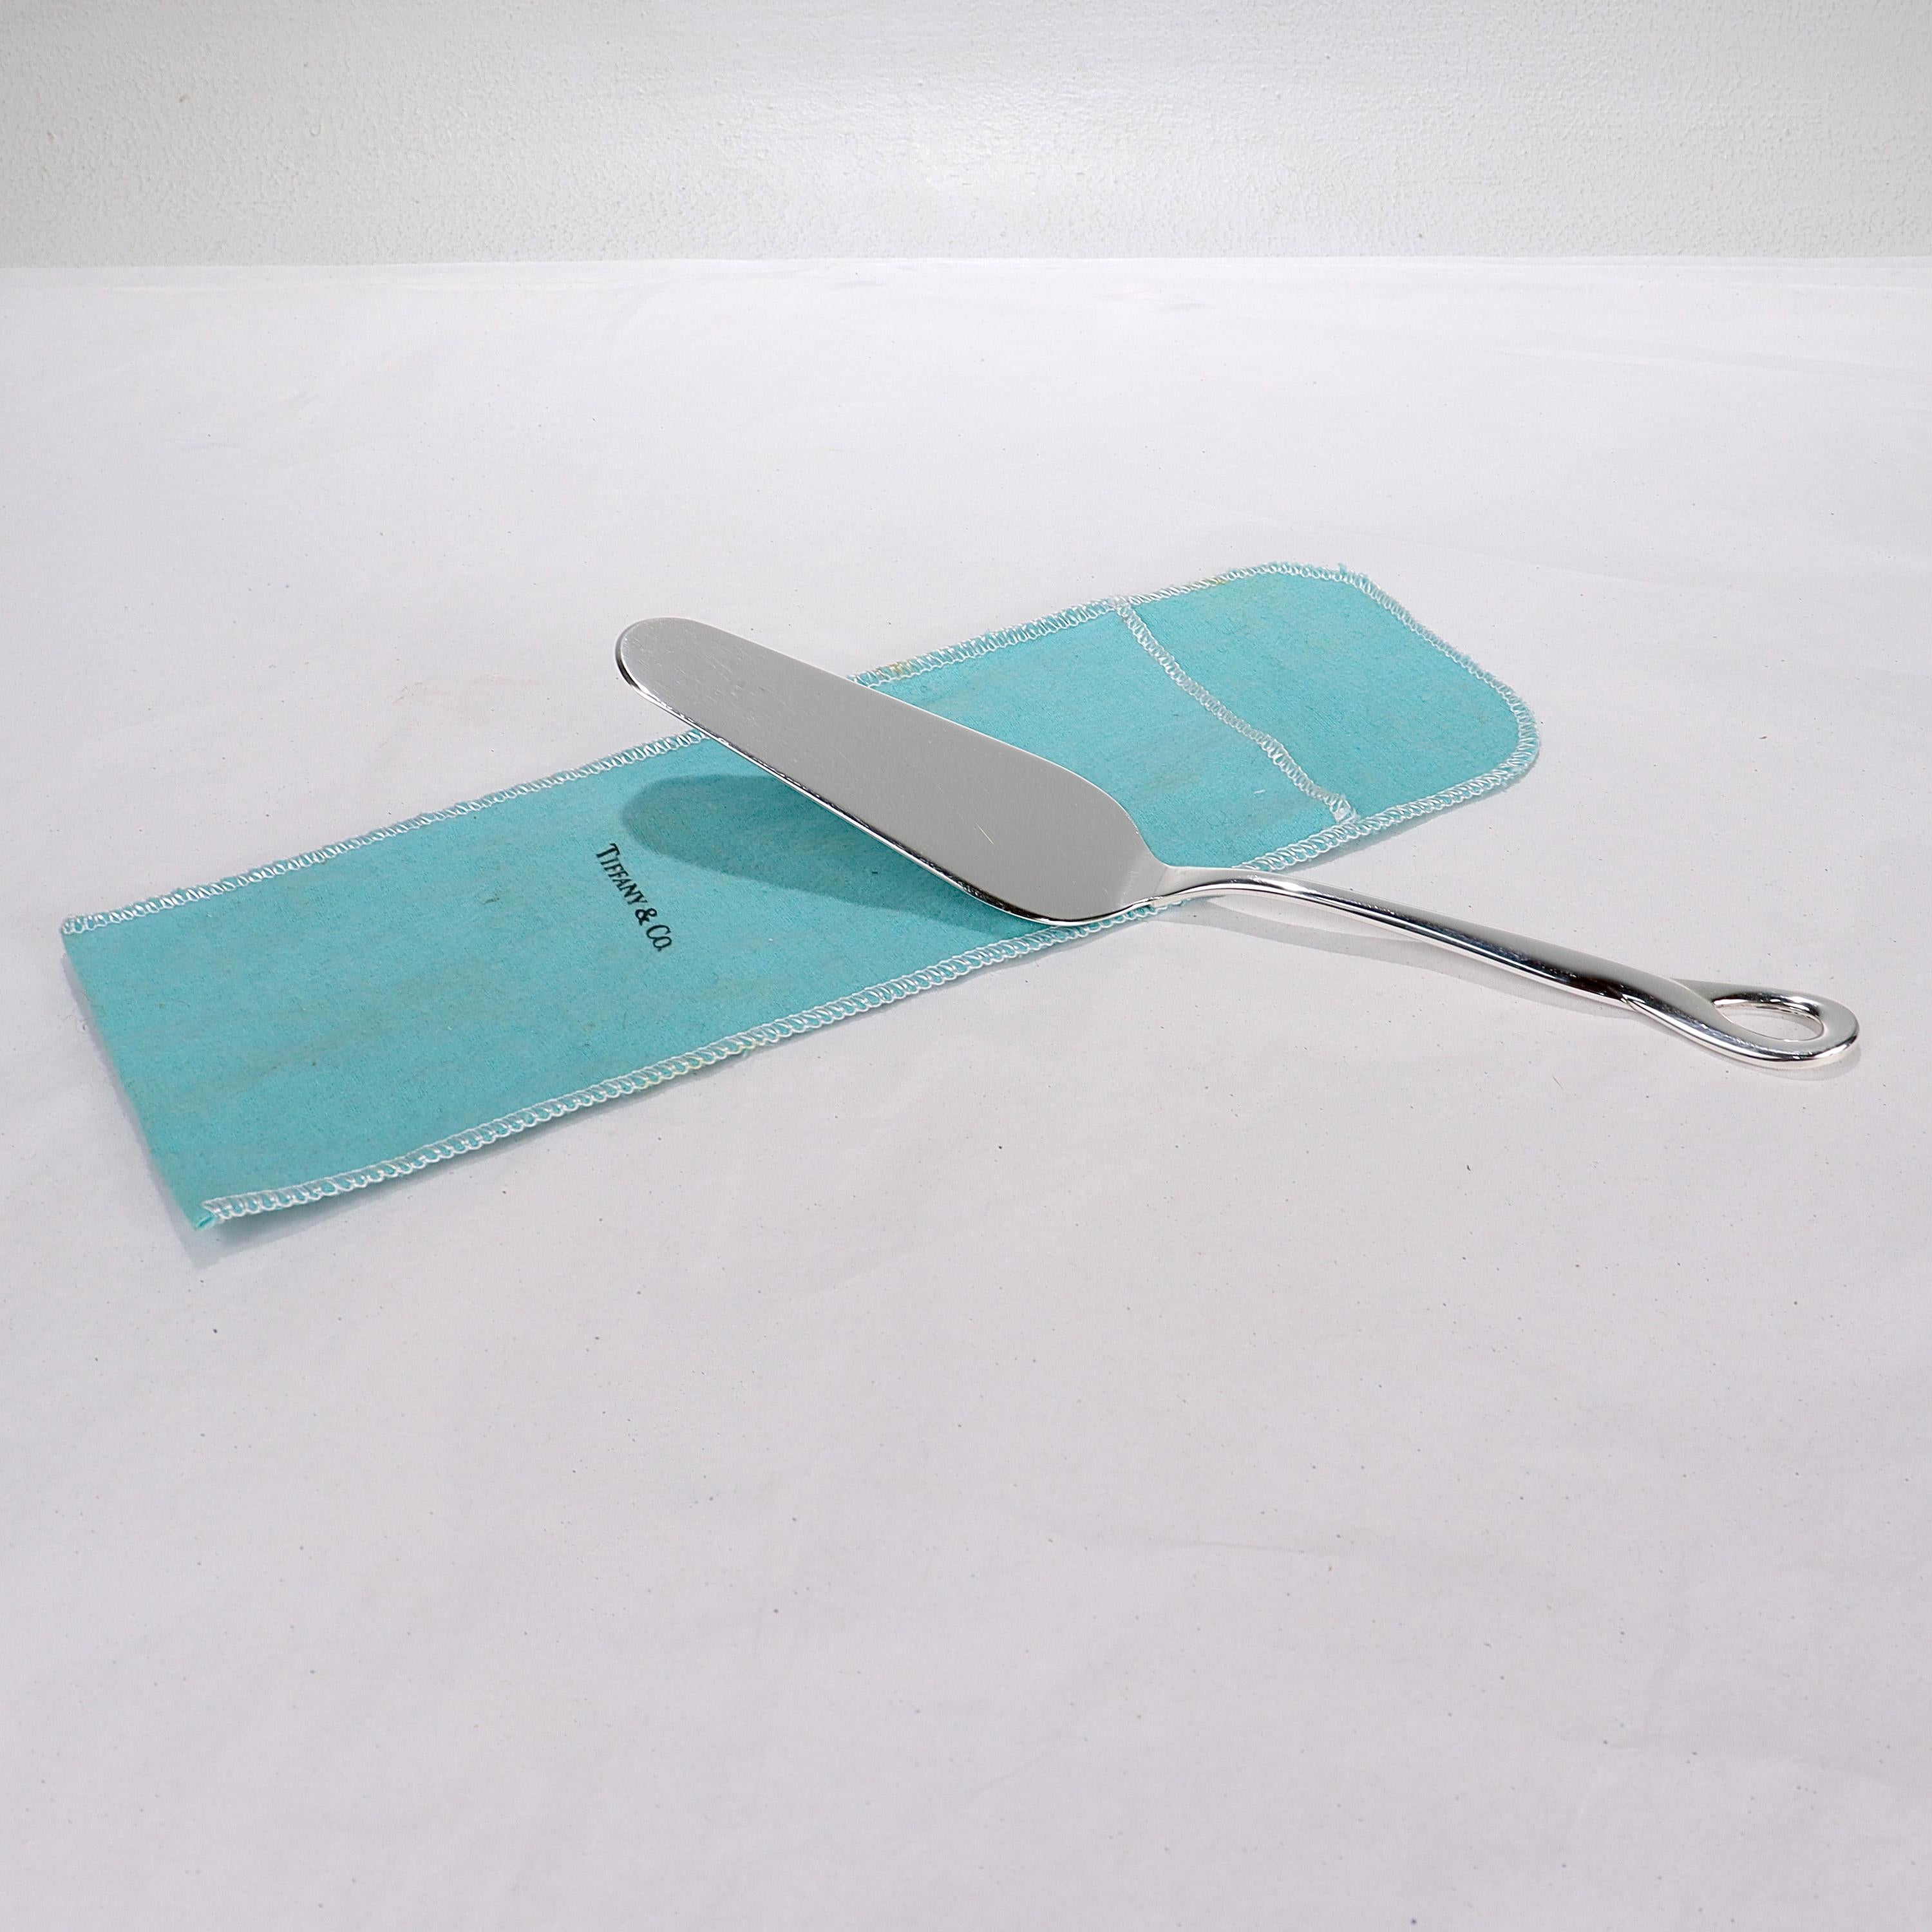 A fine Padova pie or cake server.

In sterling silver.

Designed by Elsa Peretti for Tiffany & Co.

Marked to the reverse for 1984.

Together with its original Tiffany pouch.

Simply a wonderful iconic server!

Date:
1984

Overall Condition:
It is